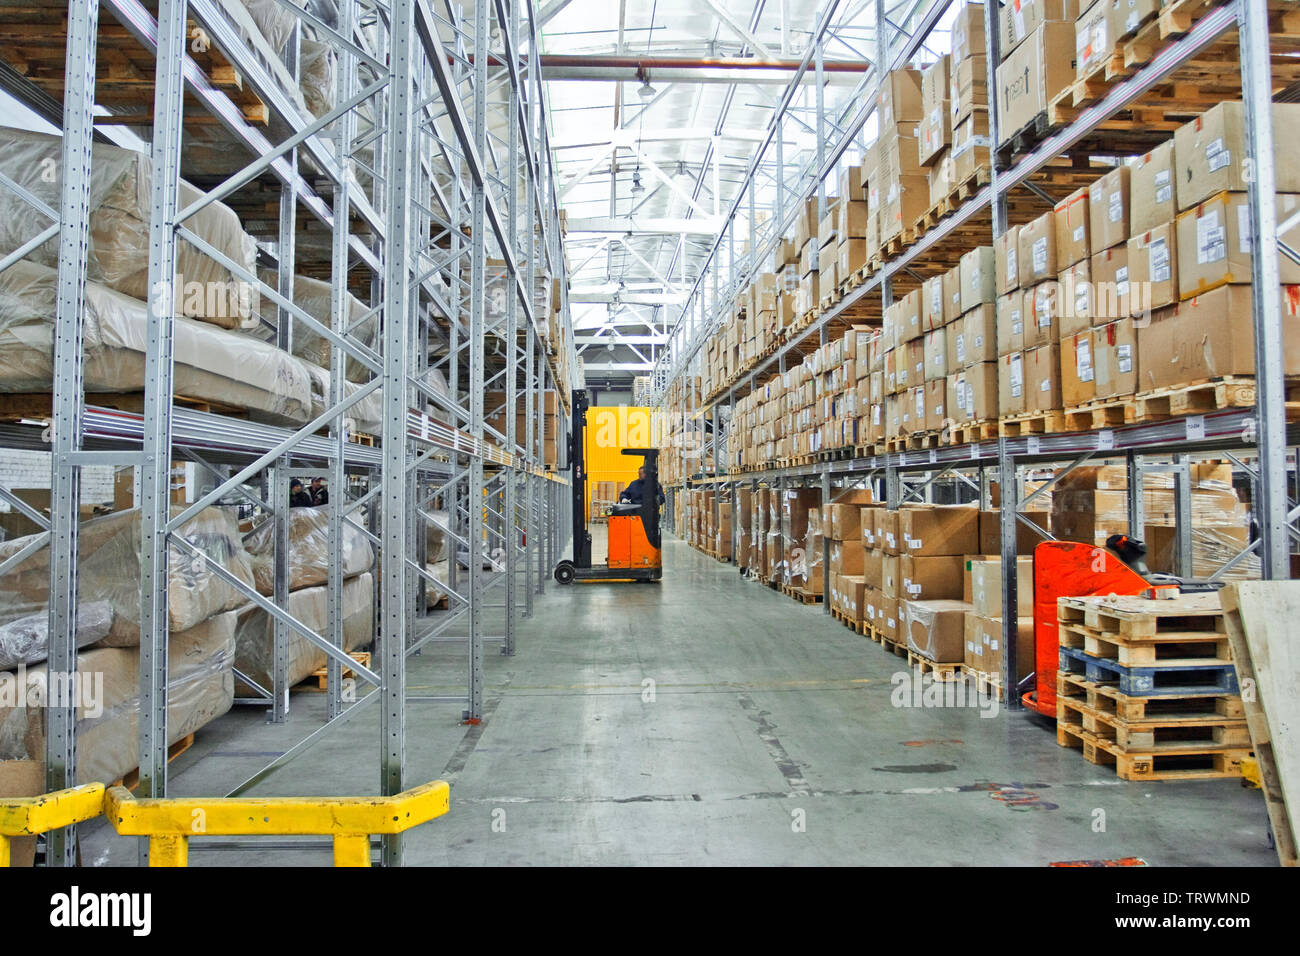 large modern empty warehouse, industrial interior with forklifts. rows of shelves with pallets, boxes, containers and goods Stock Photo